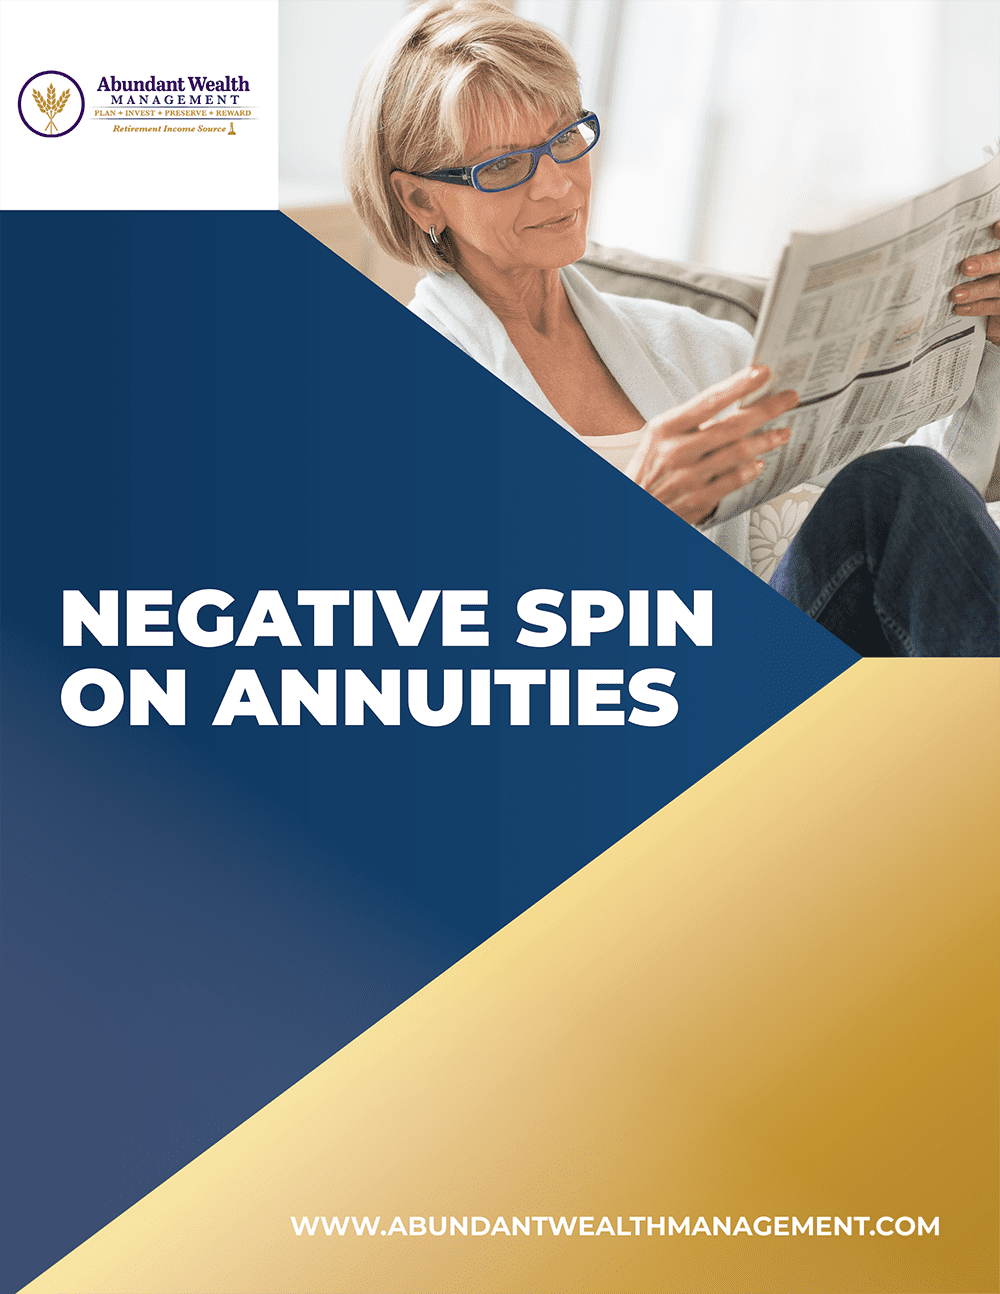 Abundant Wealth Management - Negative Spin on Annuities-1